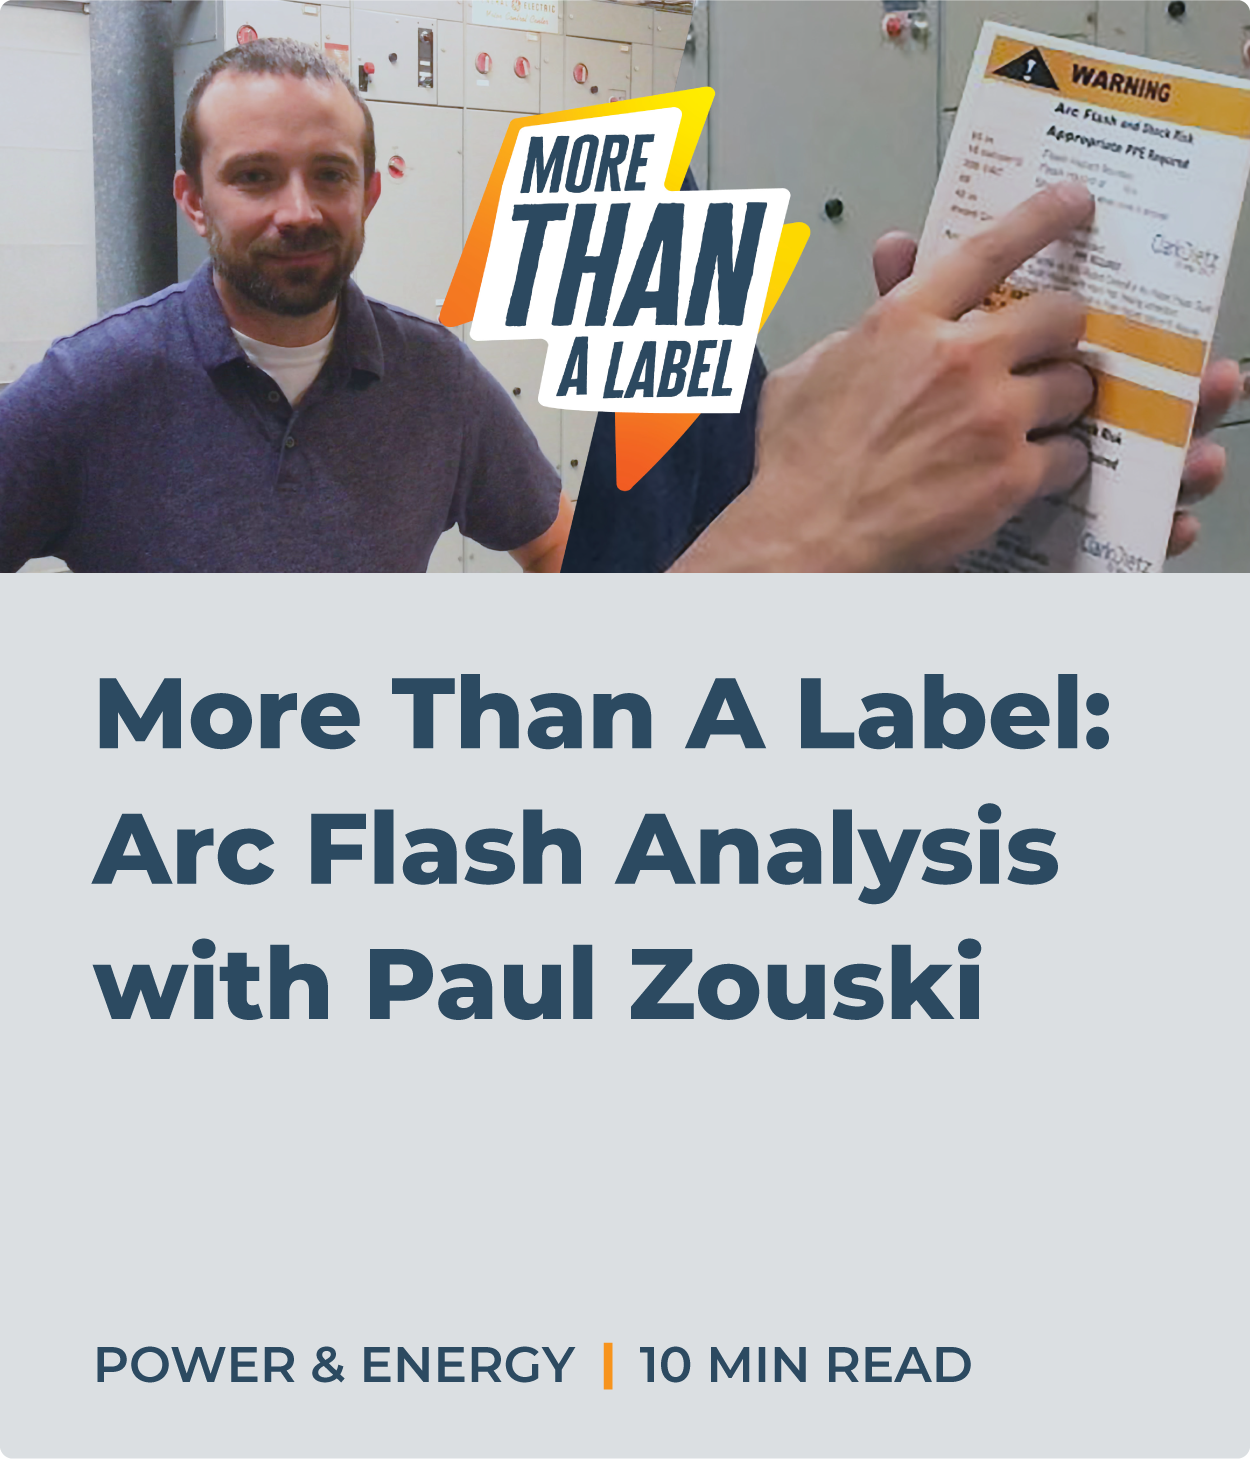 More Than A Label: Arc Flash Analysis with Paul Zouski